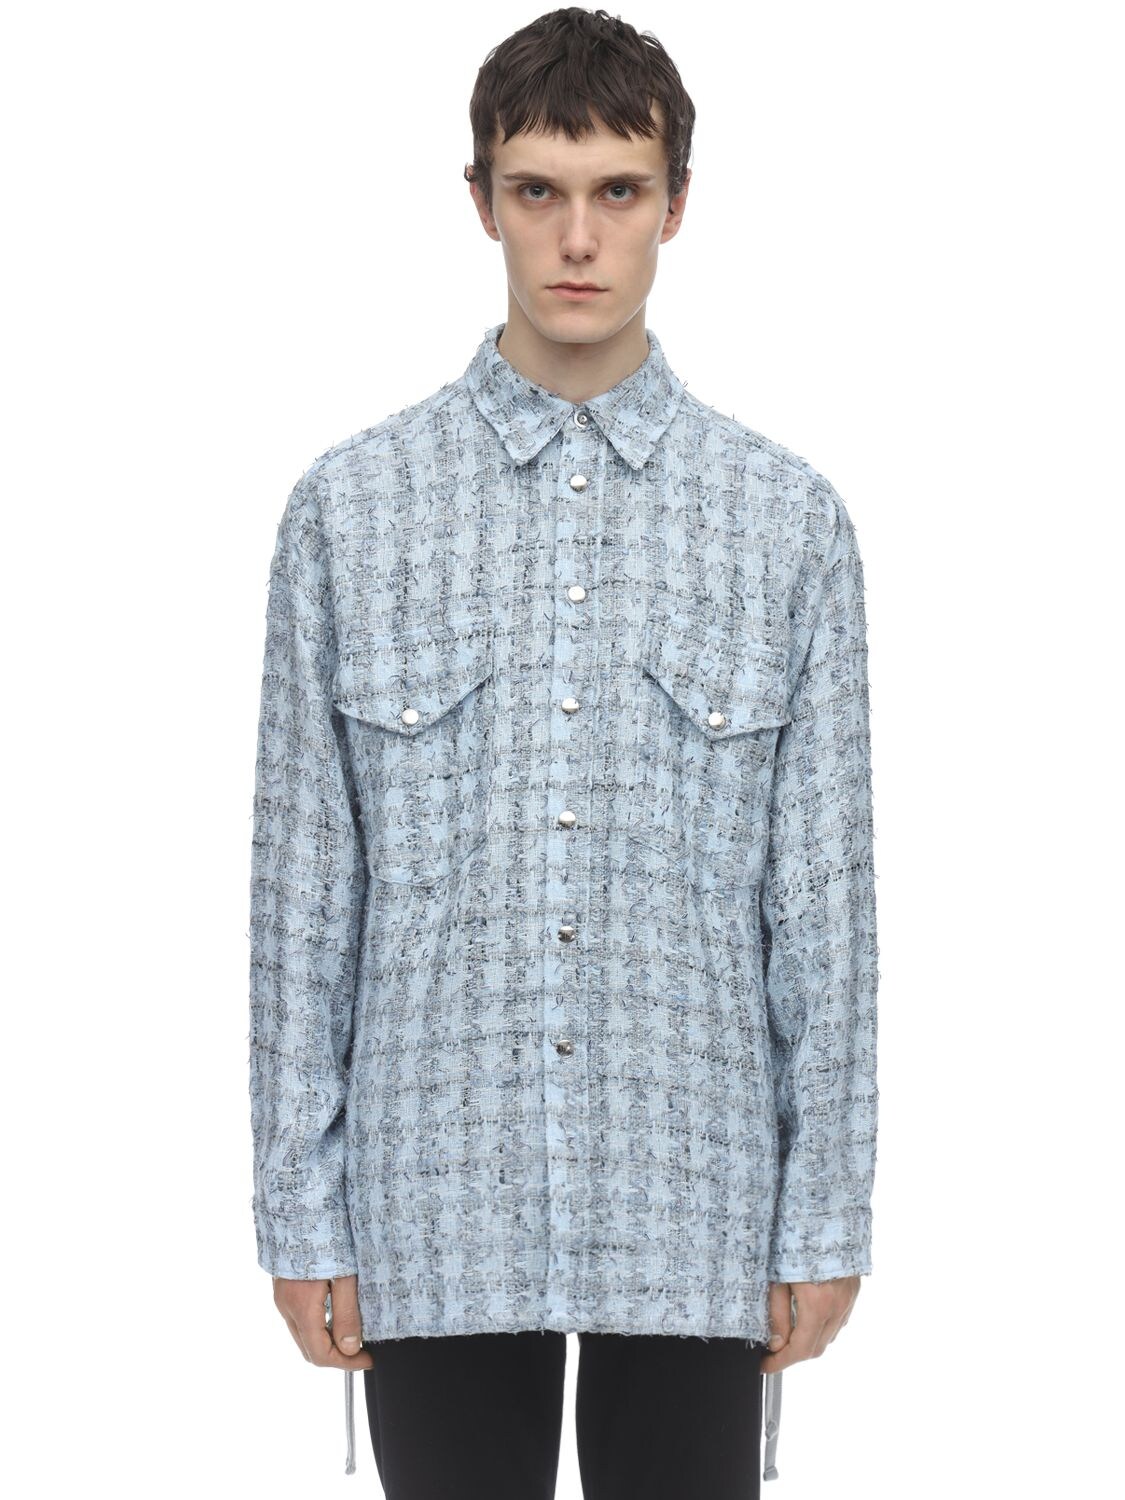 Faith Connexion Light blue Over sized tweed shirt - Luxed